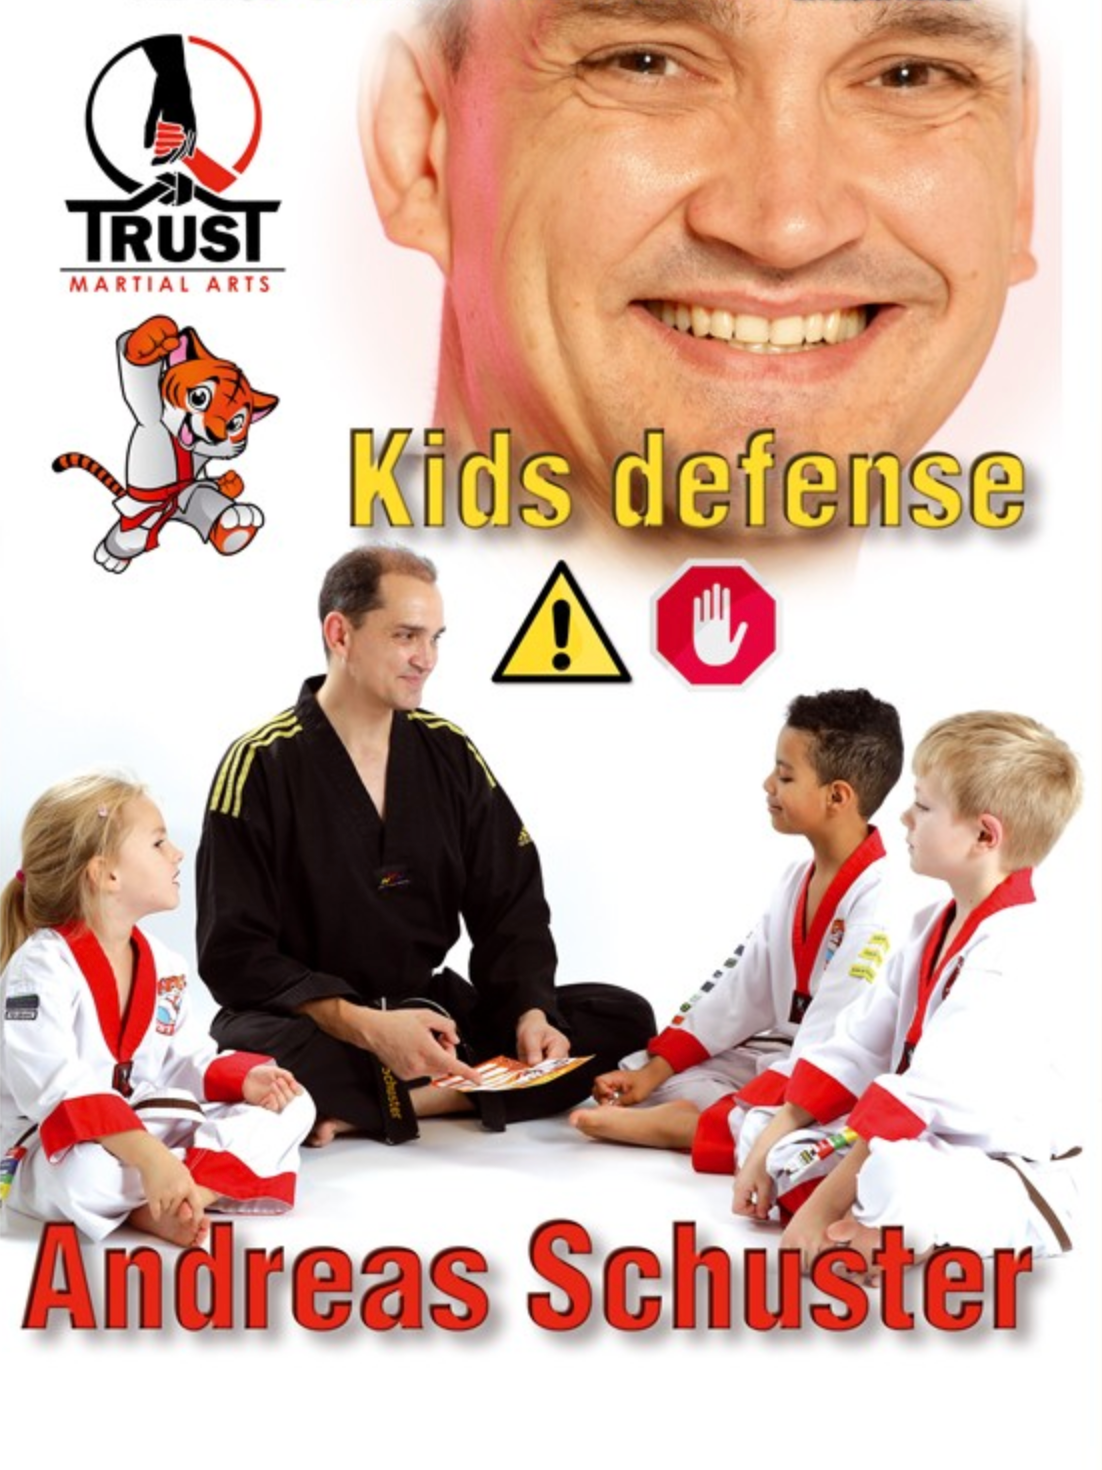 Kids Self Defense: Dealing with Strangers DVD with Andreas Schuster - Budovideos Inc